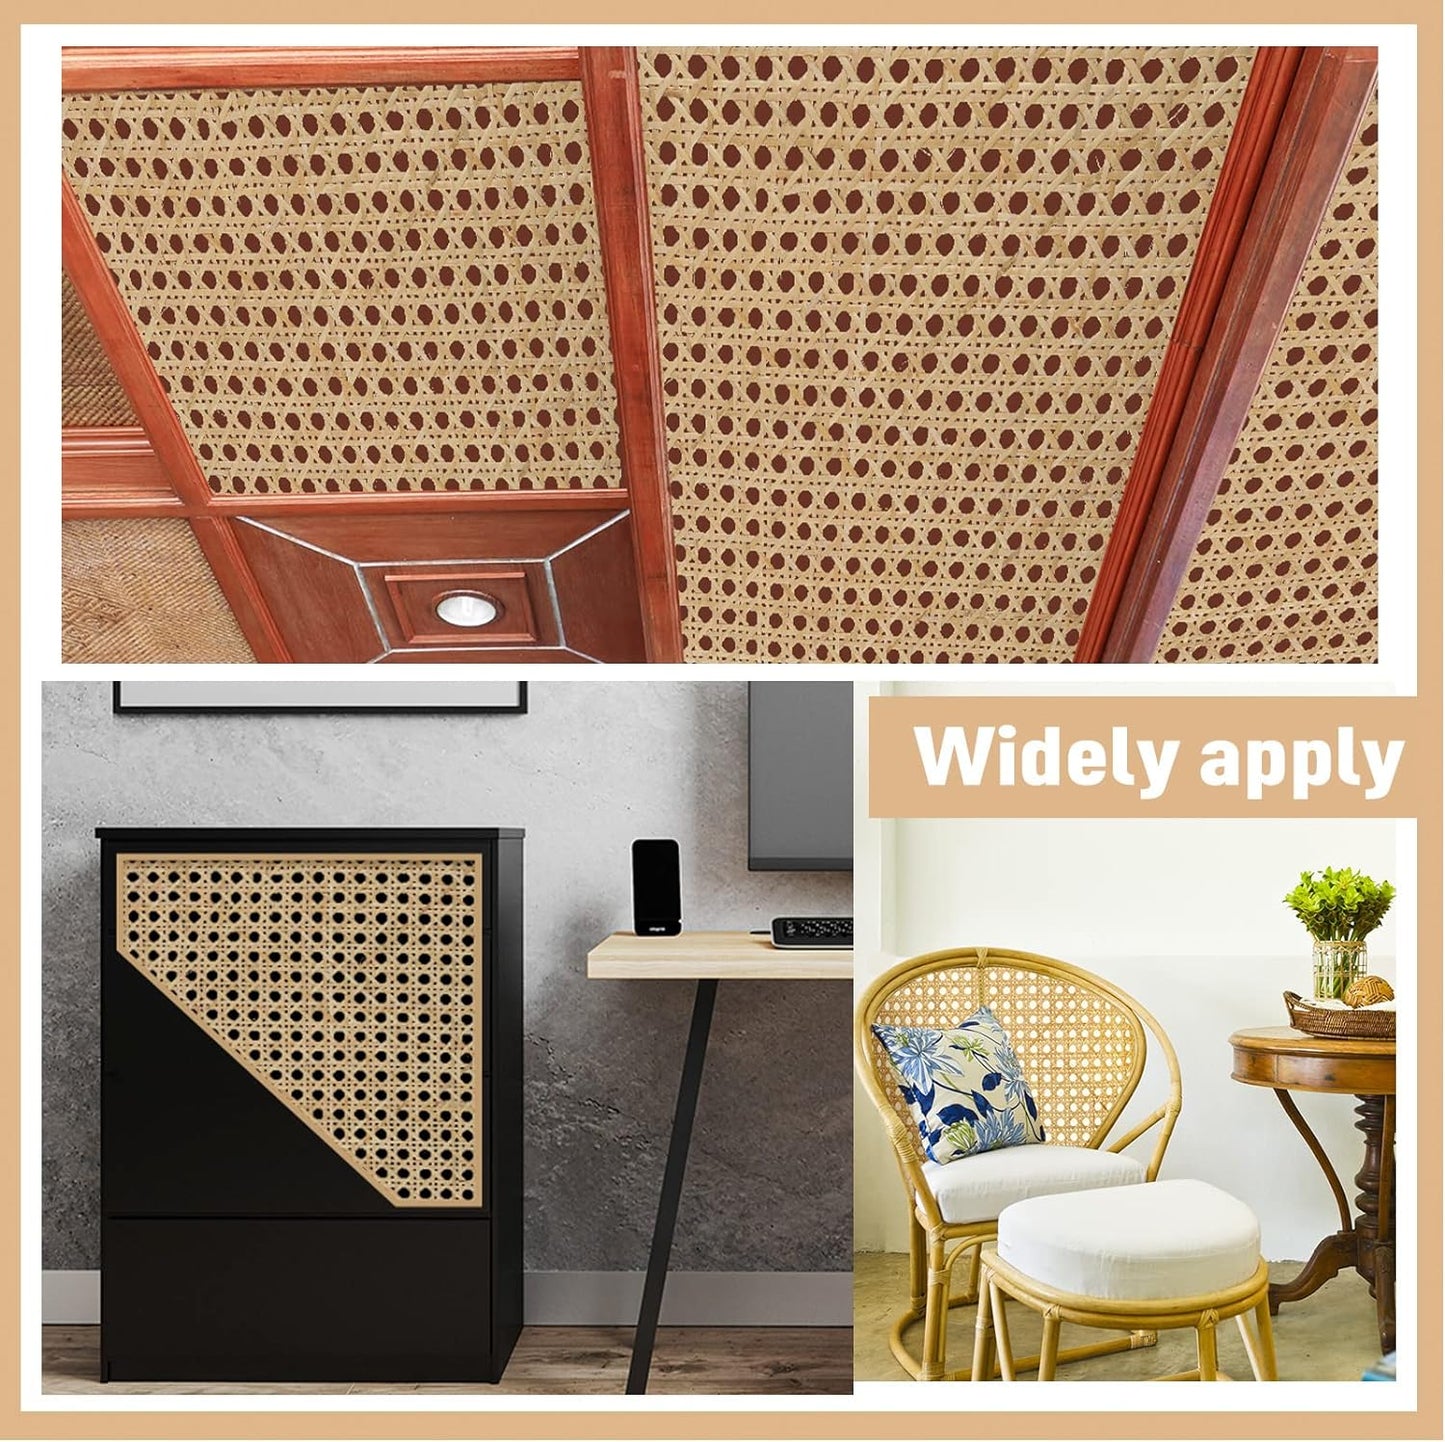 18 Inches Width Rattan Cane Webbing Roll Caning Material Weave Rattan Fabric Furniture for Caning Projects Pre Woven Open Mesh Cane for Cabinet Bed Chair Repair Caning Material DIY Supplies (2 Feet)